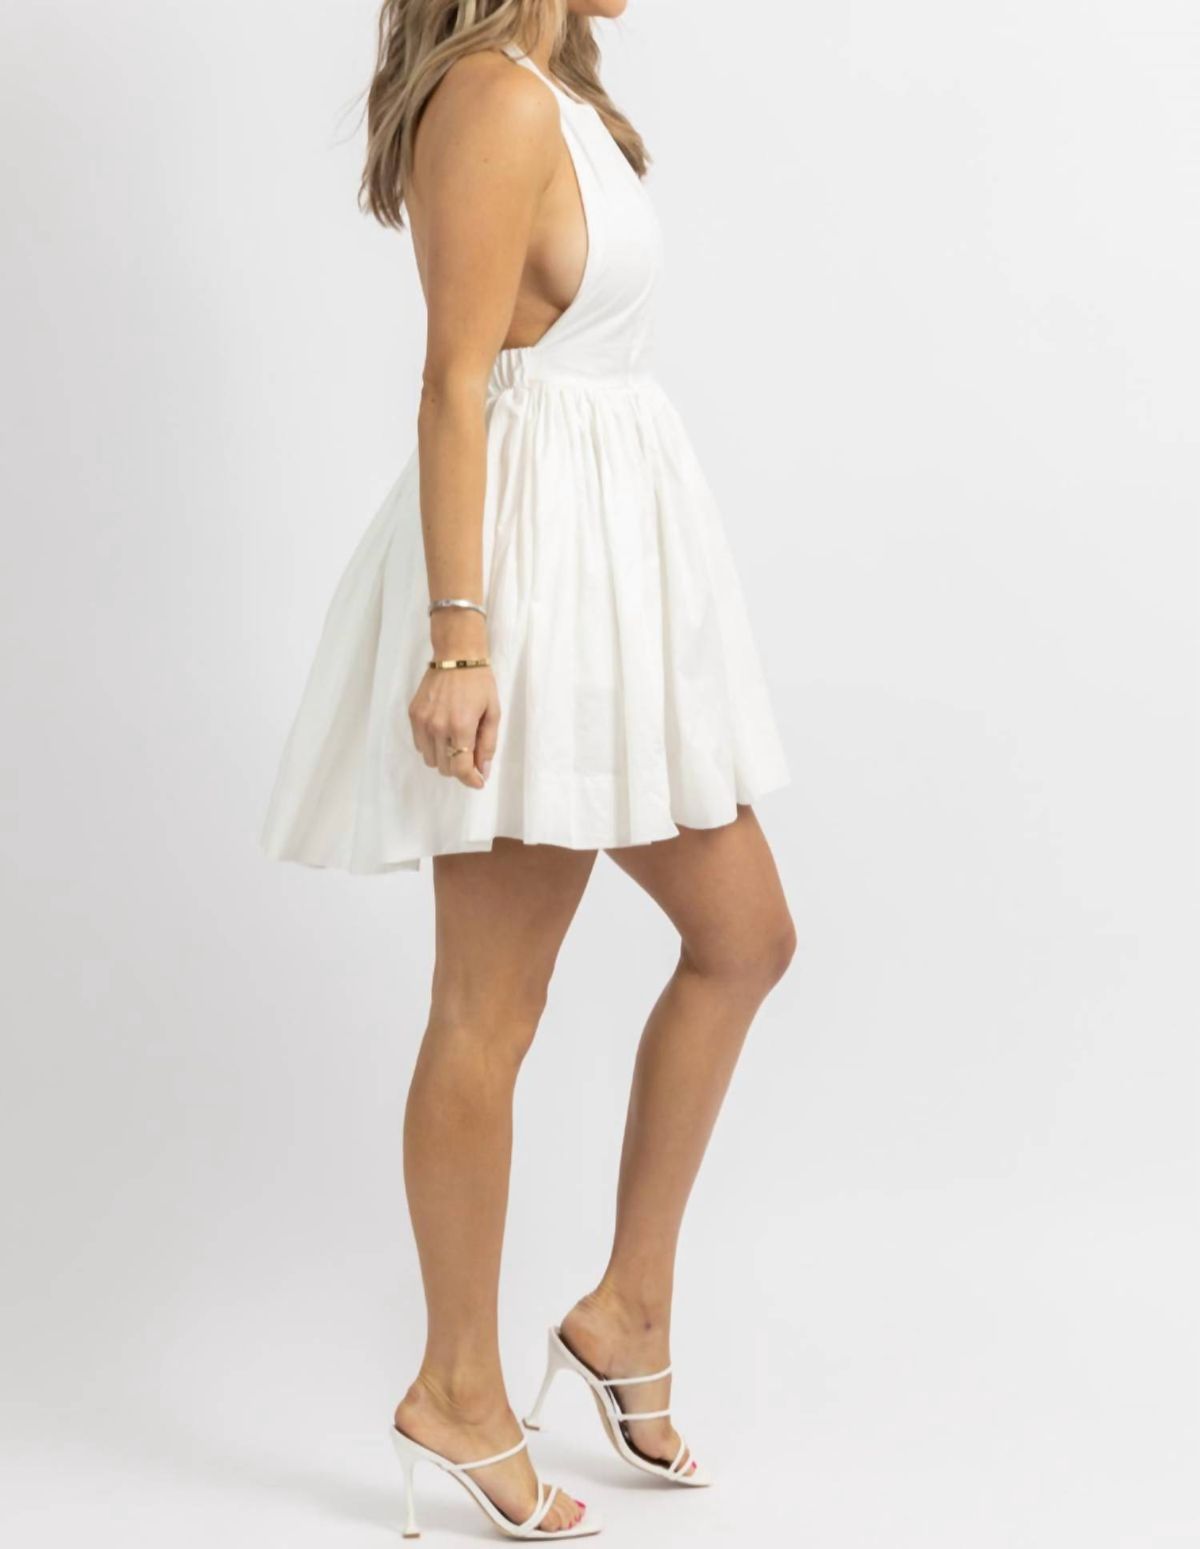 Style 1-1830648153-2696 MABLE Size L Halter White Cocktail Dress on Queenly